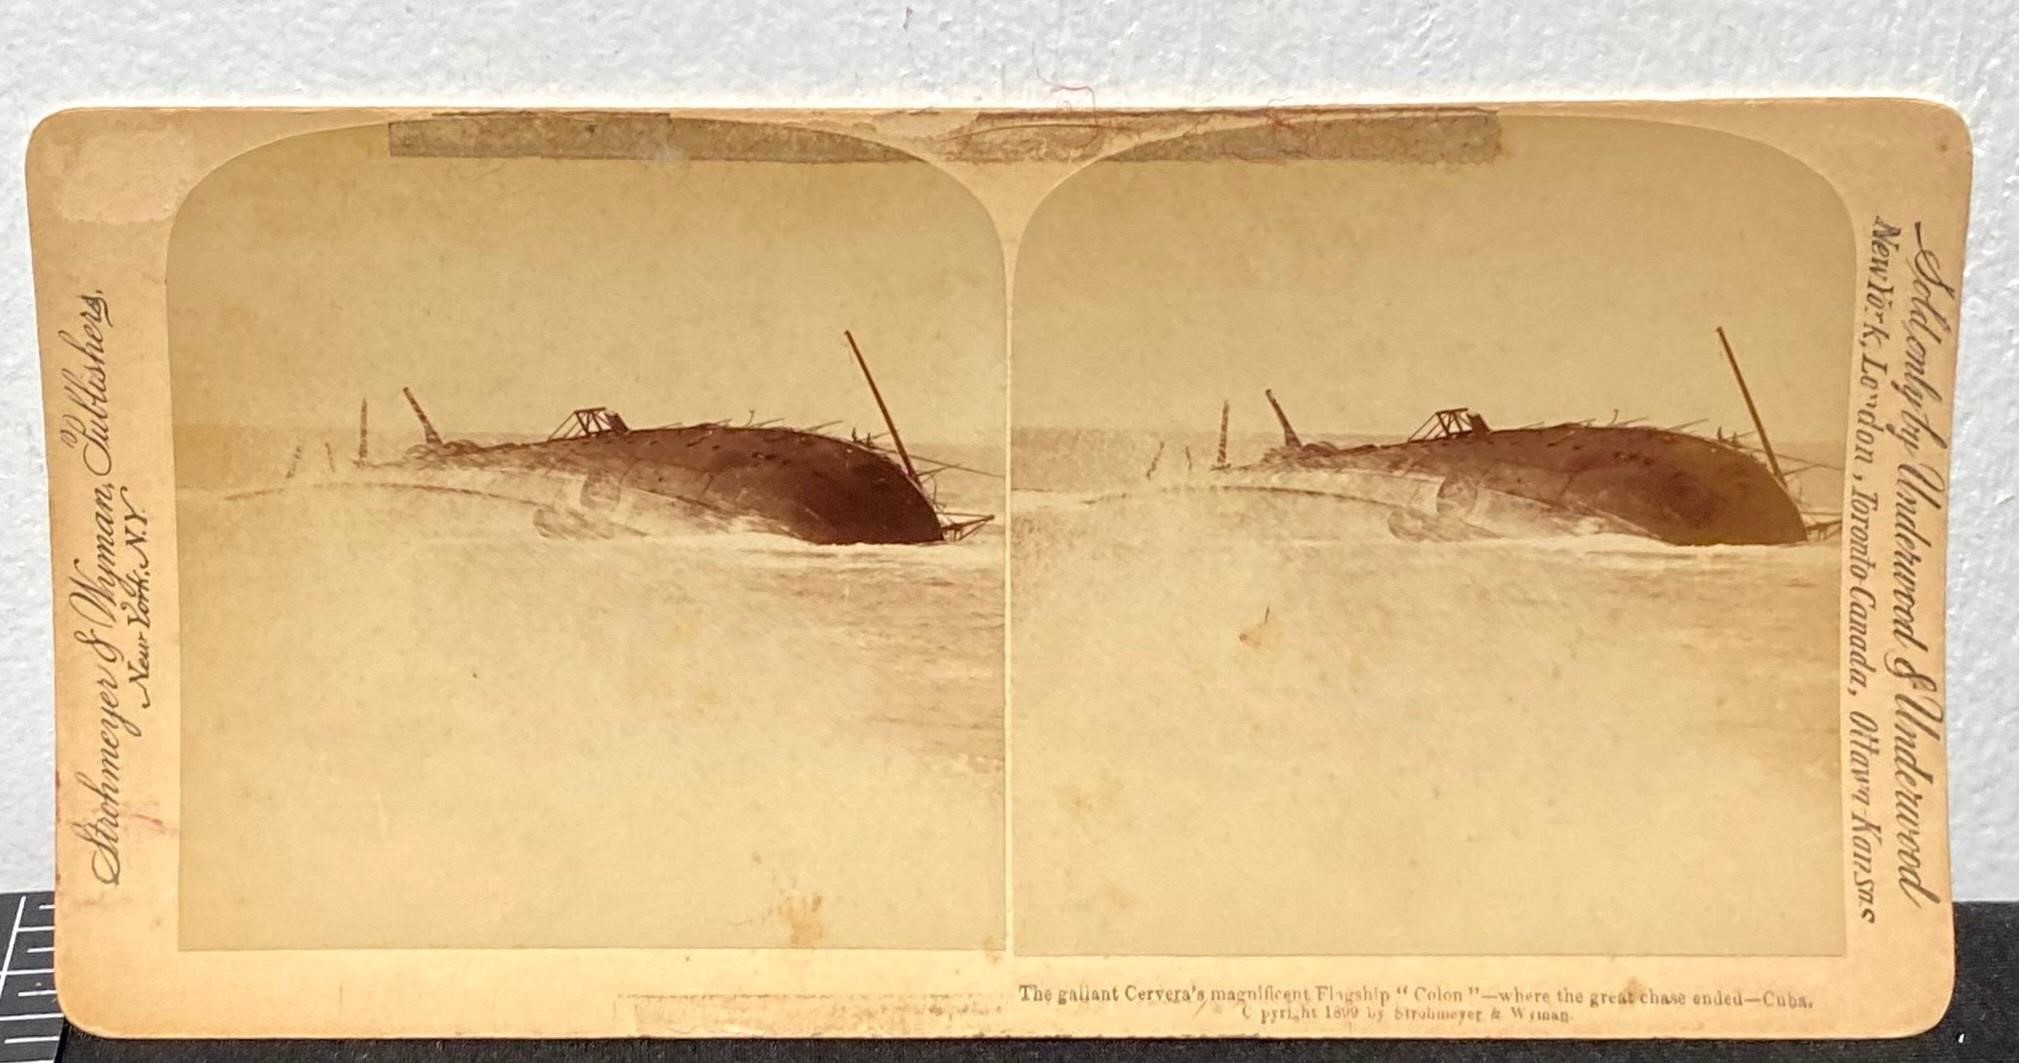 Stereograph 1897